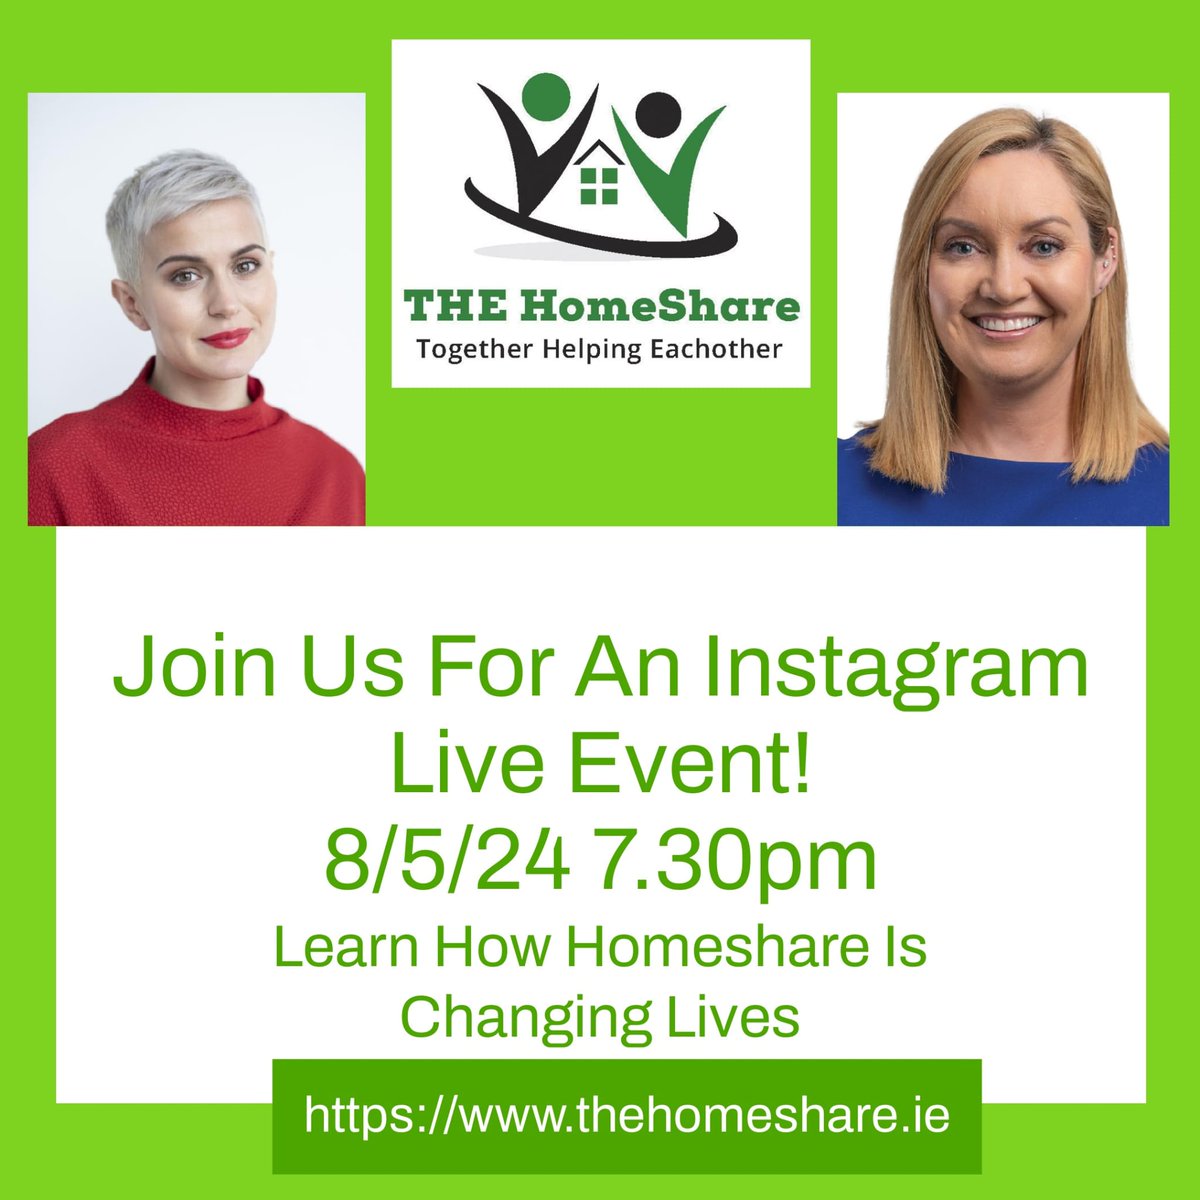 🏠 Have your heard of The HomeShare? It is Ireland’s only not-for-profit HomeShare programme, helping older people who wish to remain at home, to live as independently as possible. This evening I will join an Instagram live with @vickicasserly and the HomeShare team.